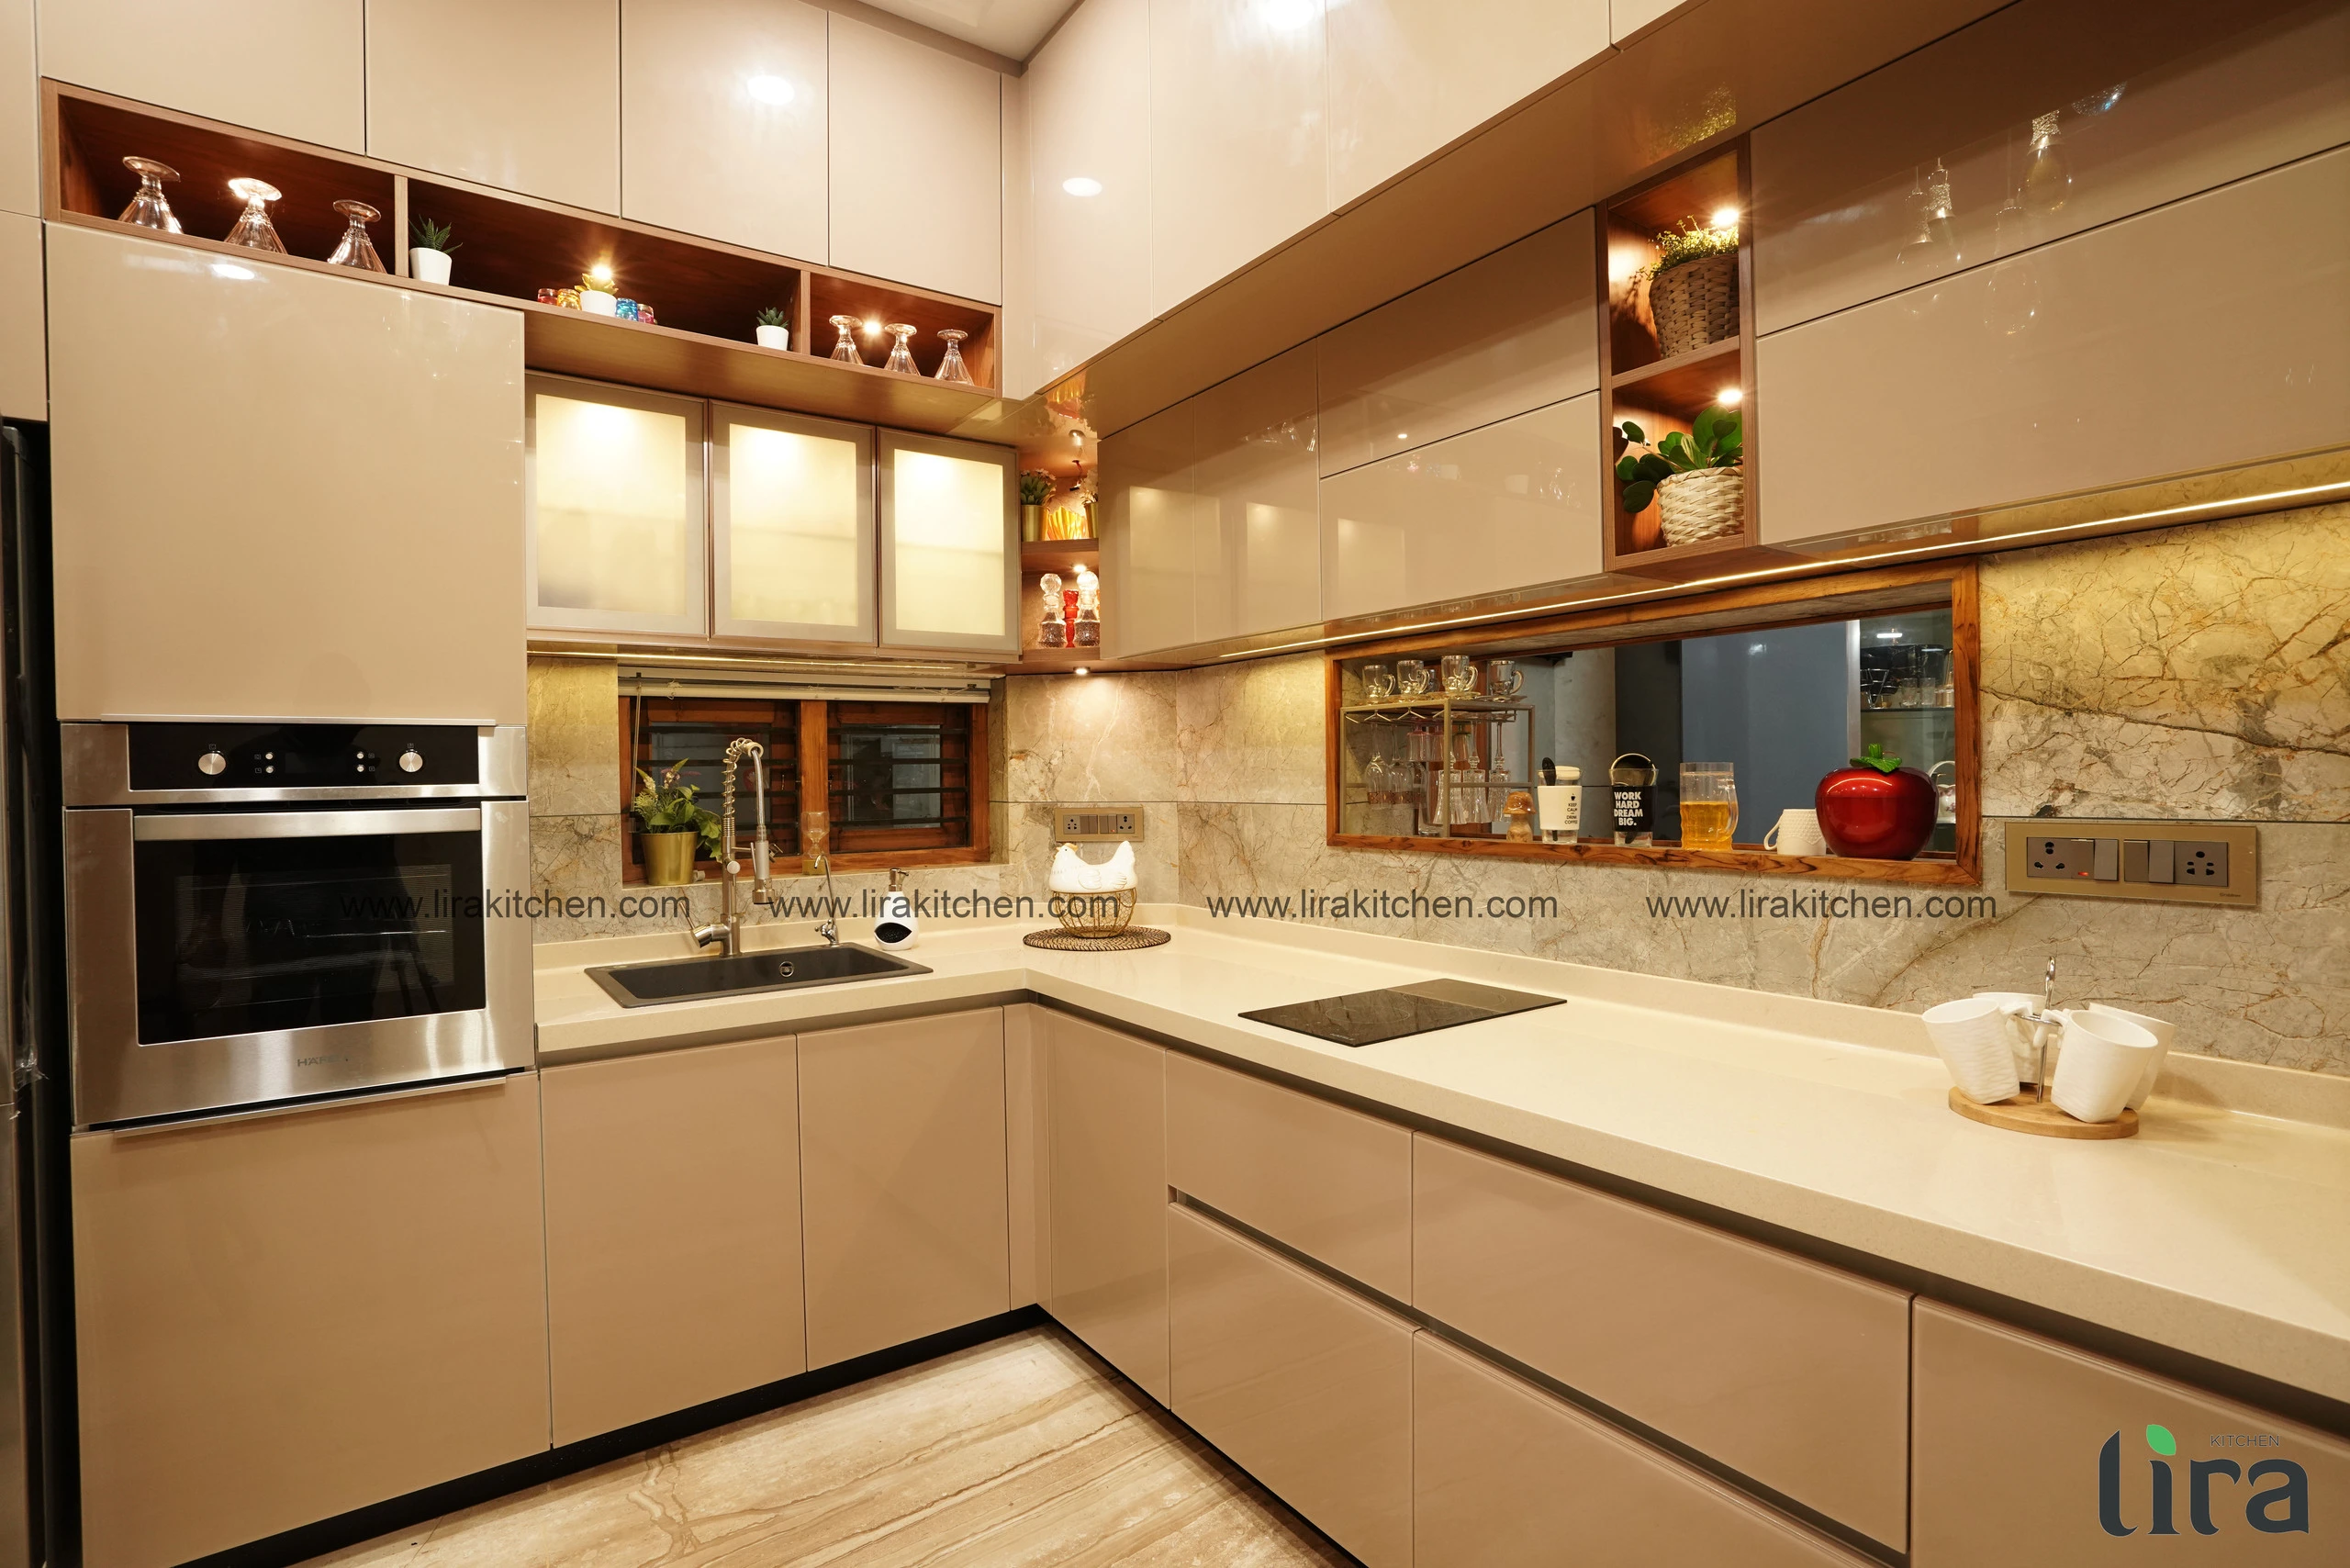 Finding the Best Modular Kitchen Design: A Guide by Lira Kitchen